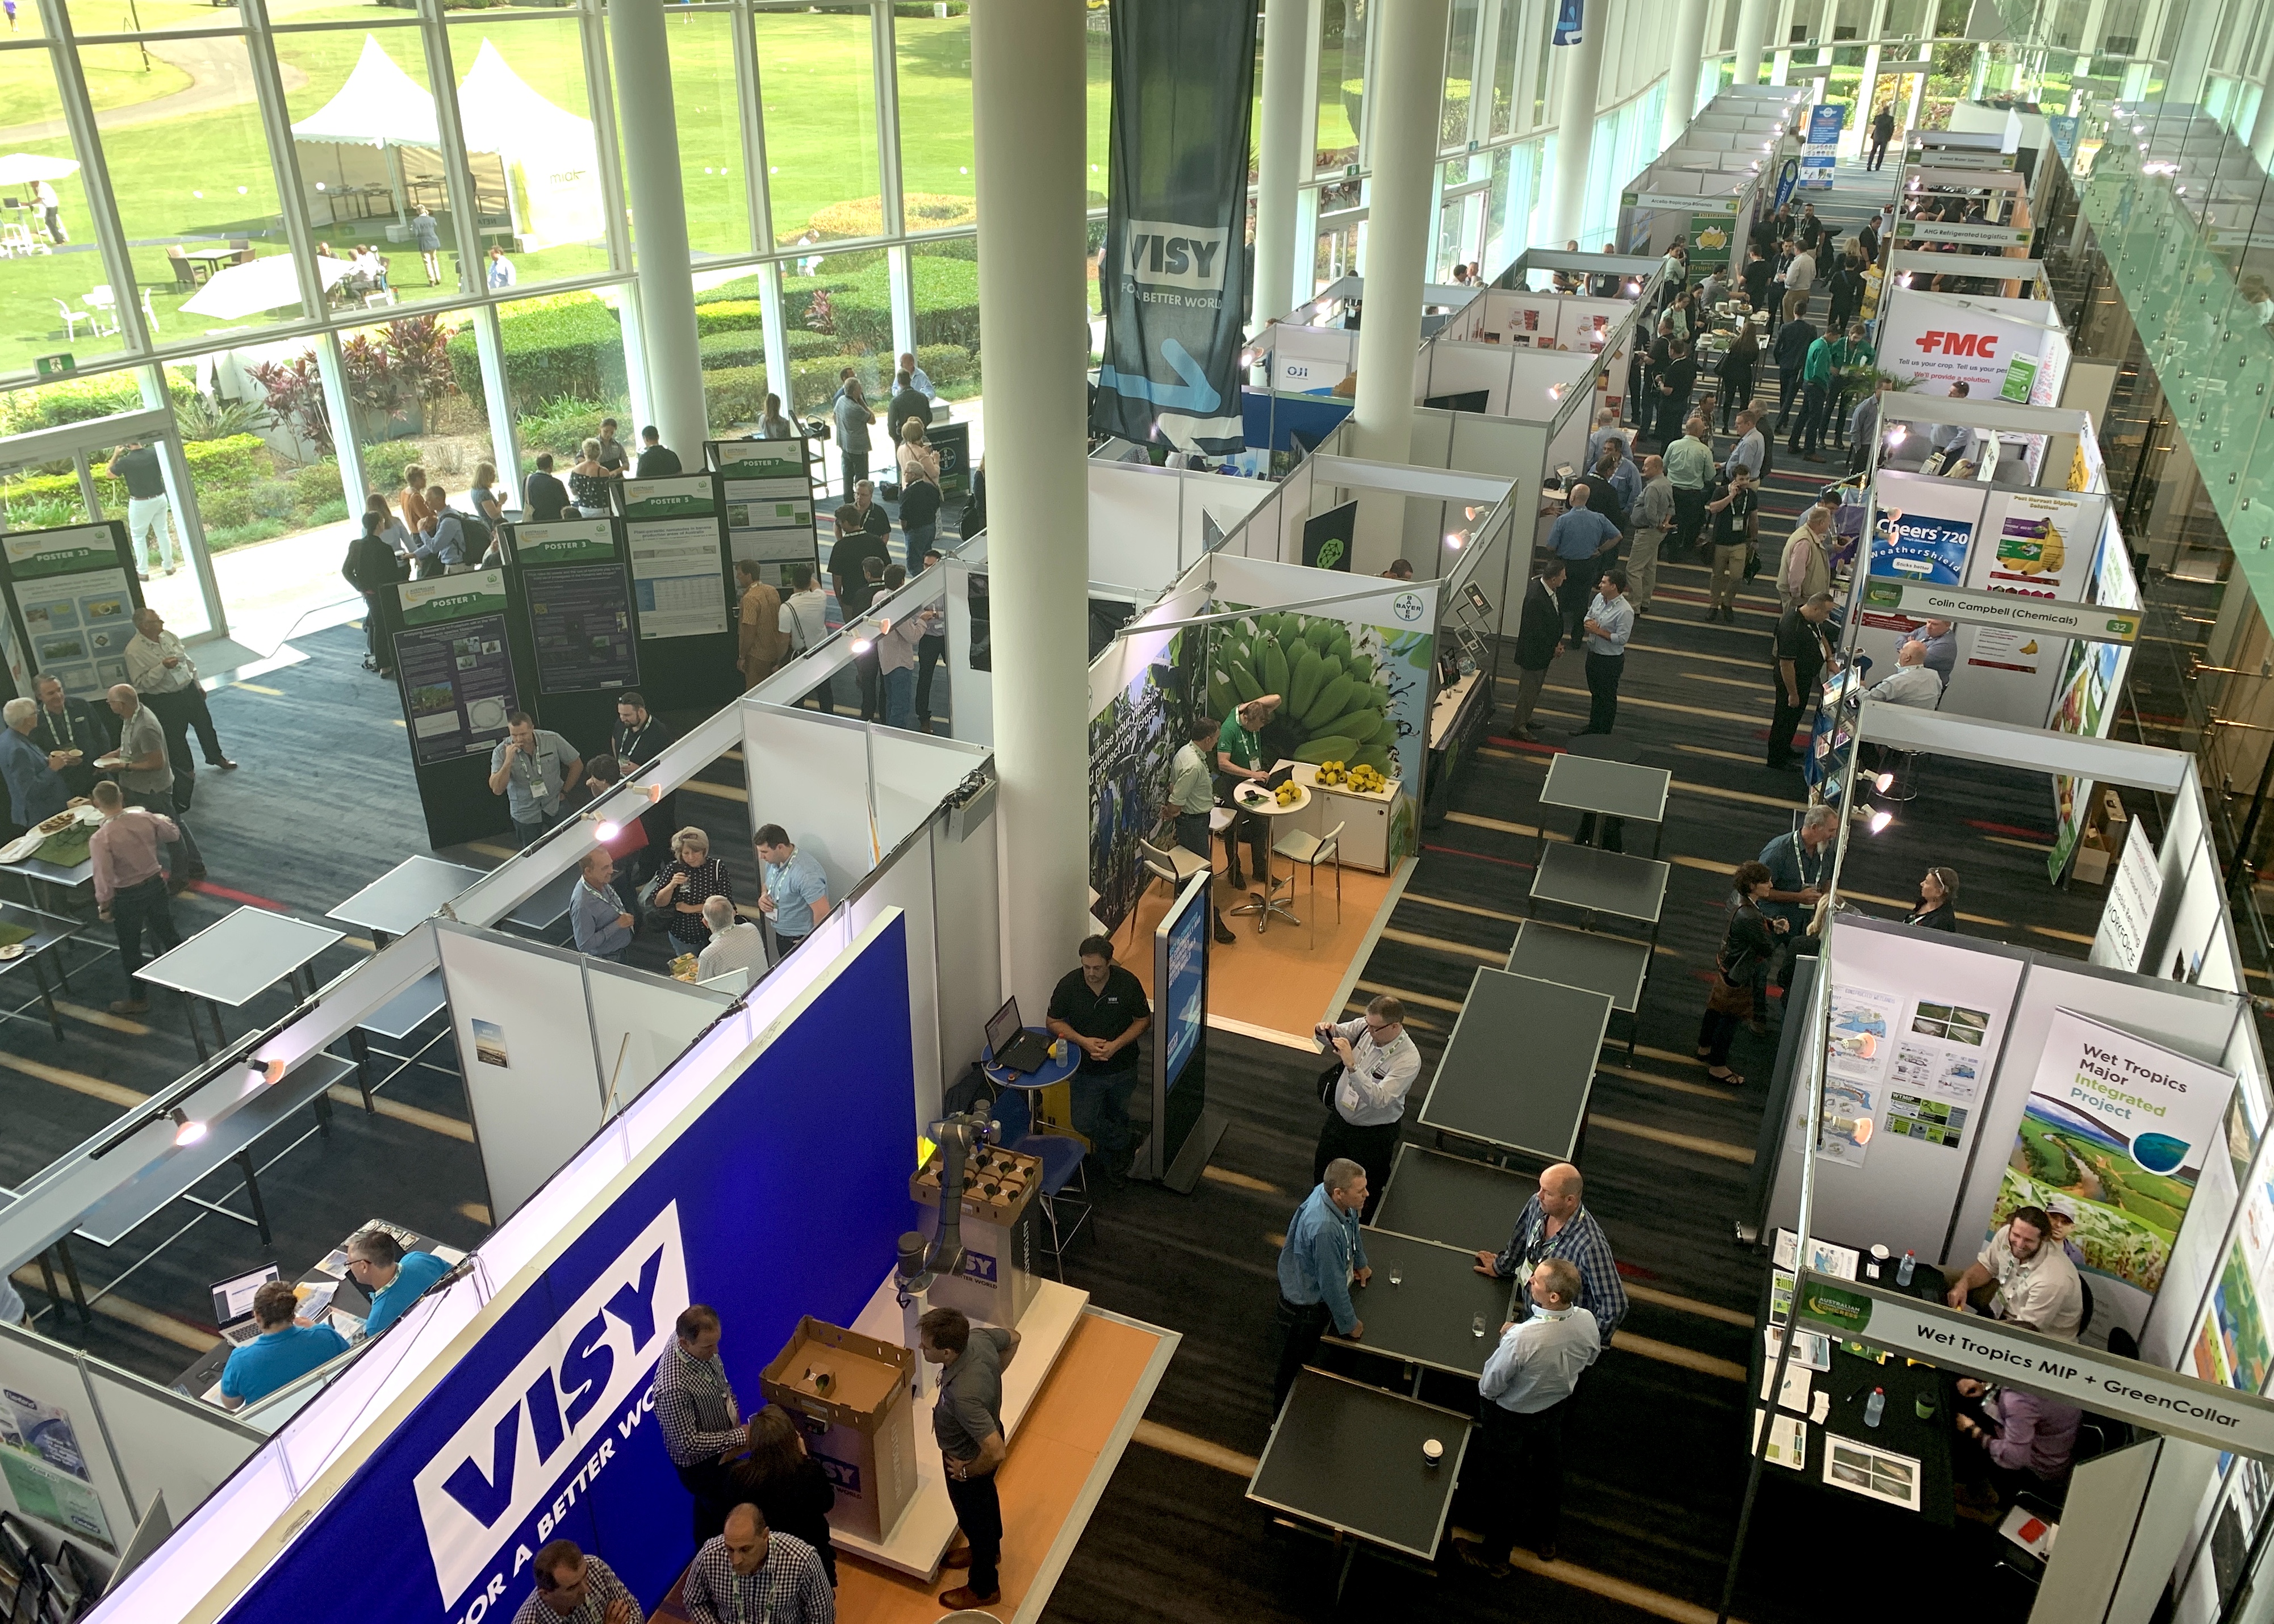 Tradeshow pic from above